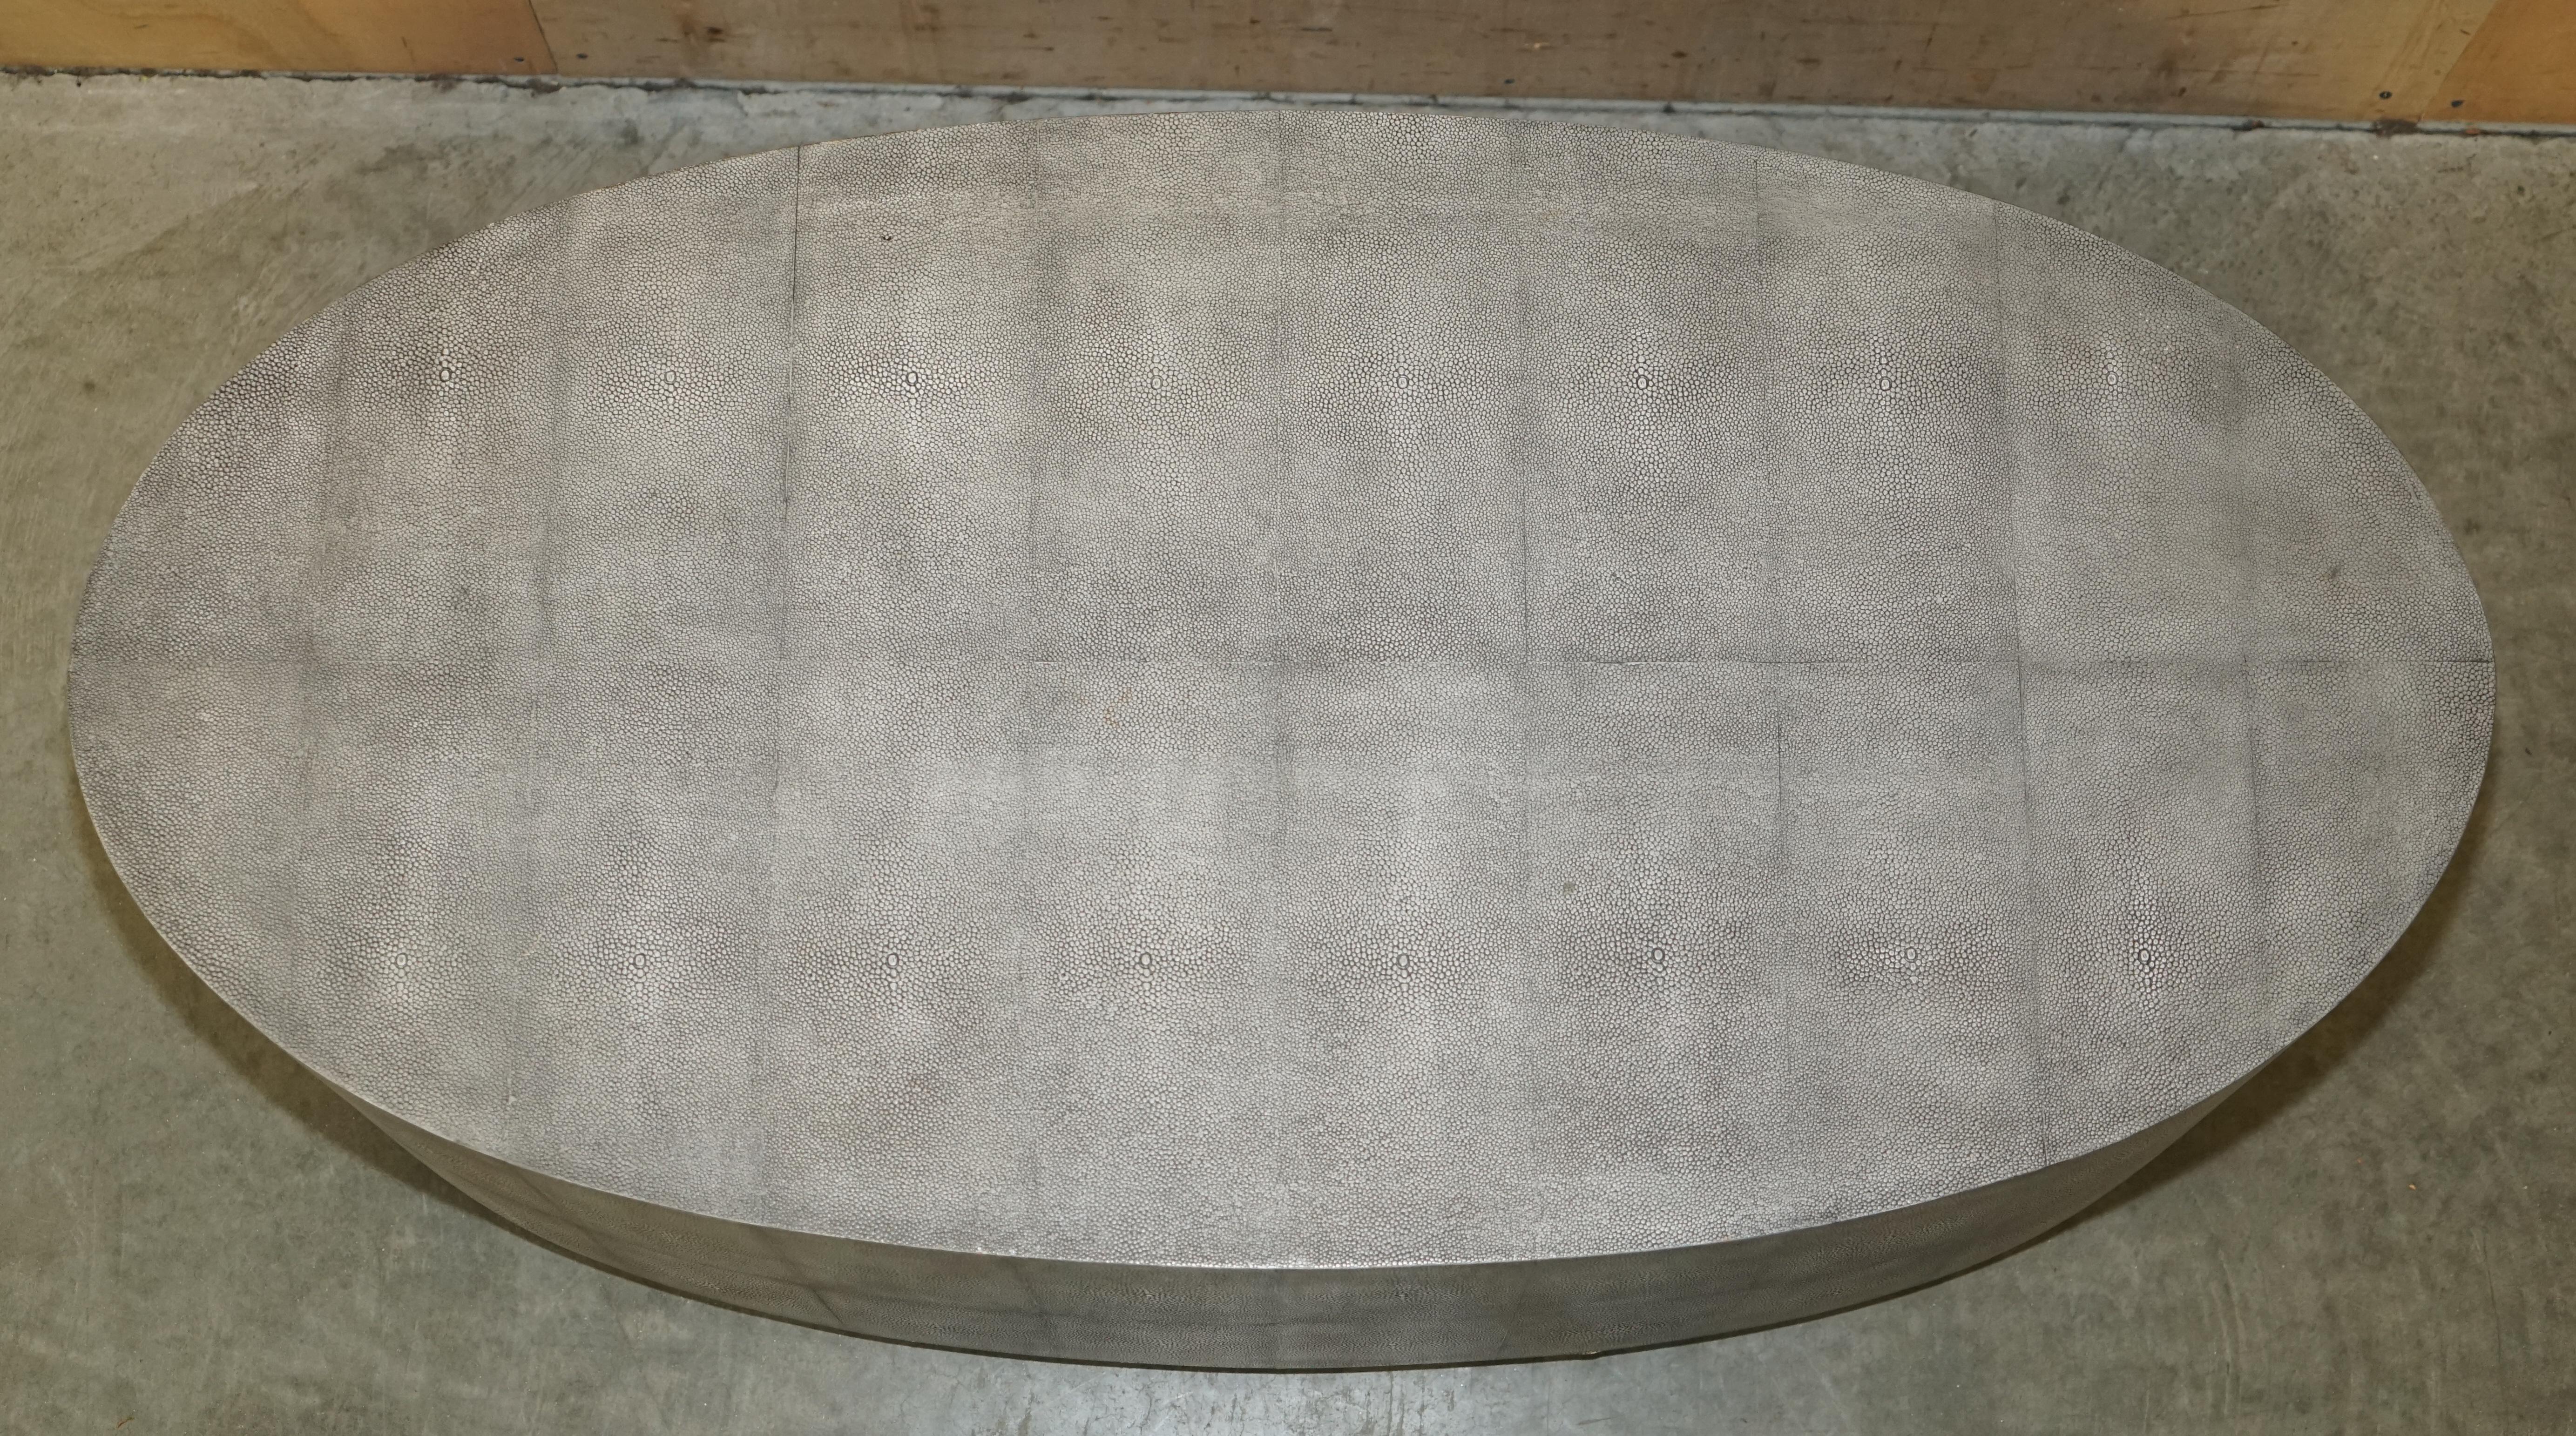 We are delighted to offer for sale this stunning, large, oval Shagreen (Shark or Manta ray skin) coffee table 

These are a very substantial coffee table. Shagreen for those of you who aren’t familiar is Shark or Ray skin. There are reproductions